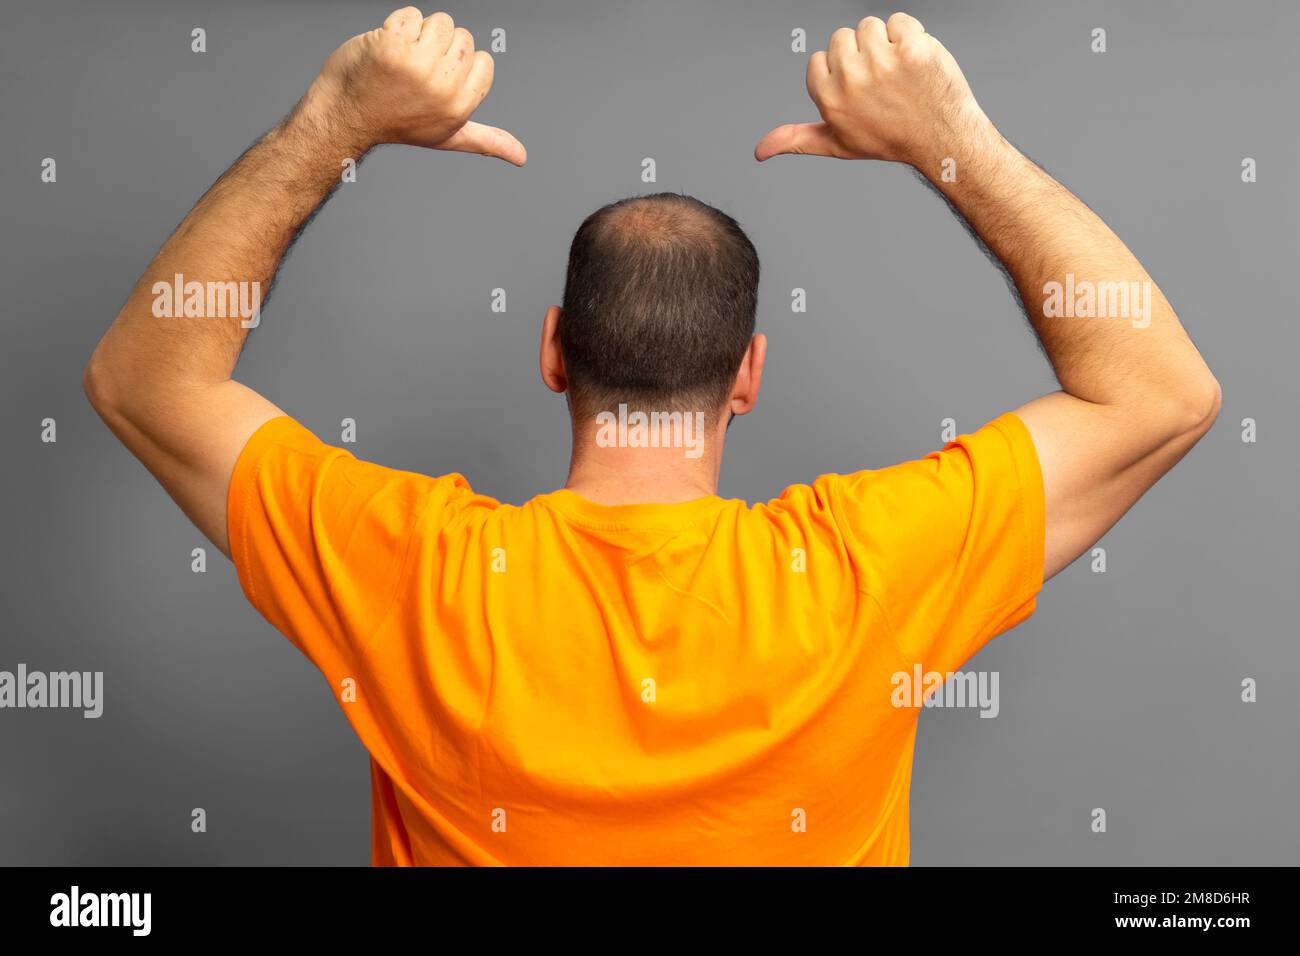 Proud man in orange t-shirt with his back turned pointing with his thumbs at his receding bald spot, isolated on gray background. Stock Photo